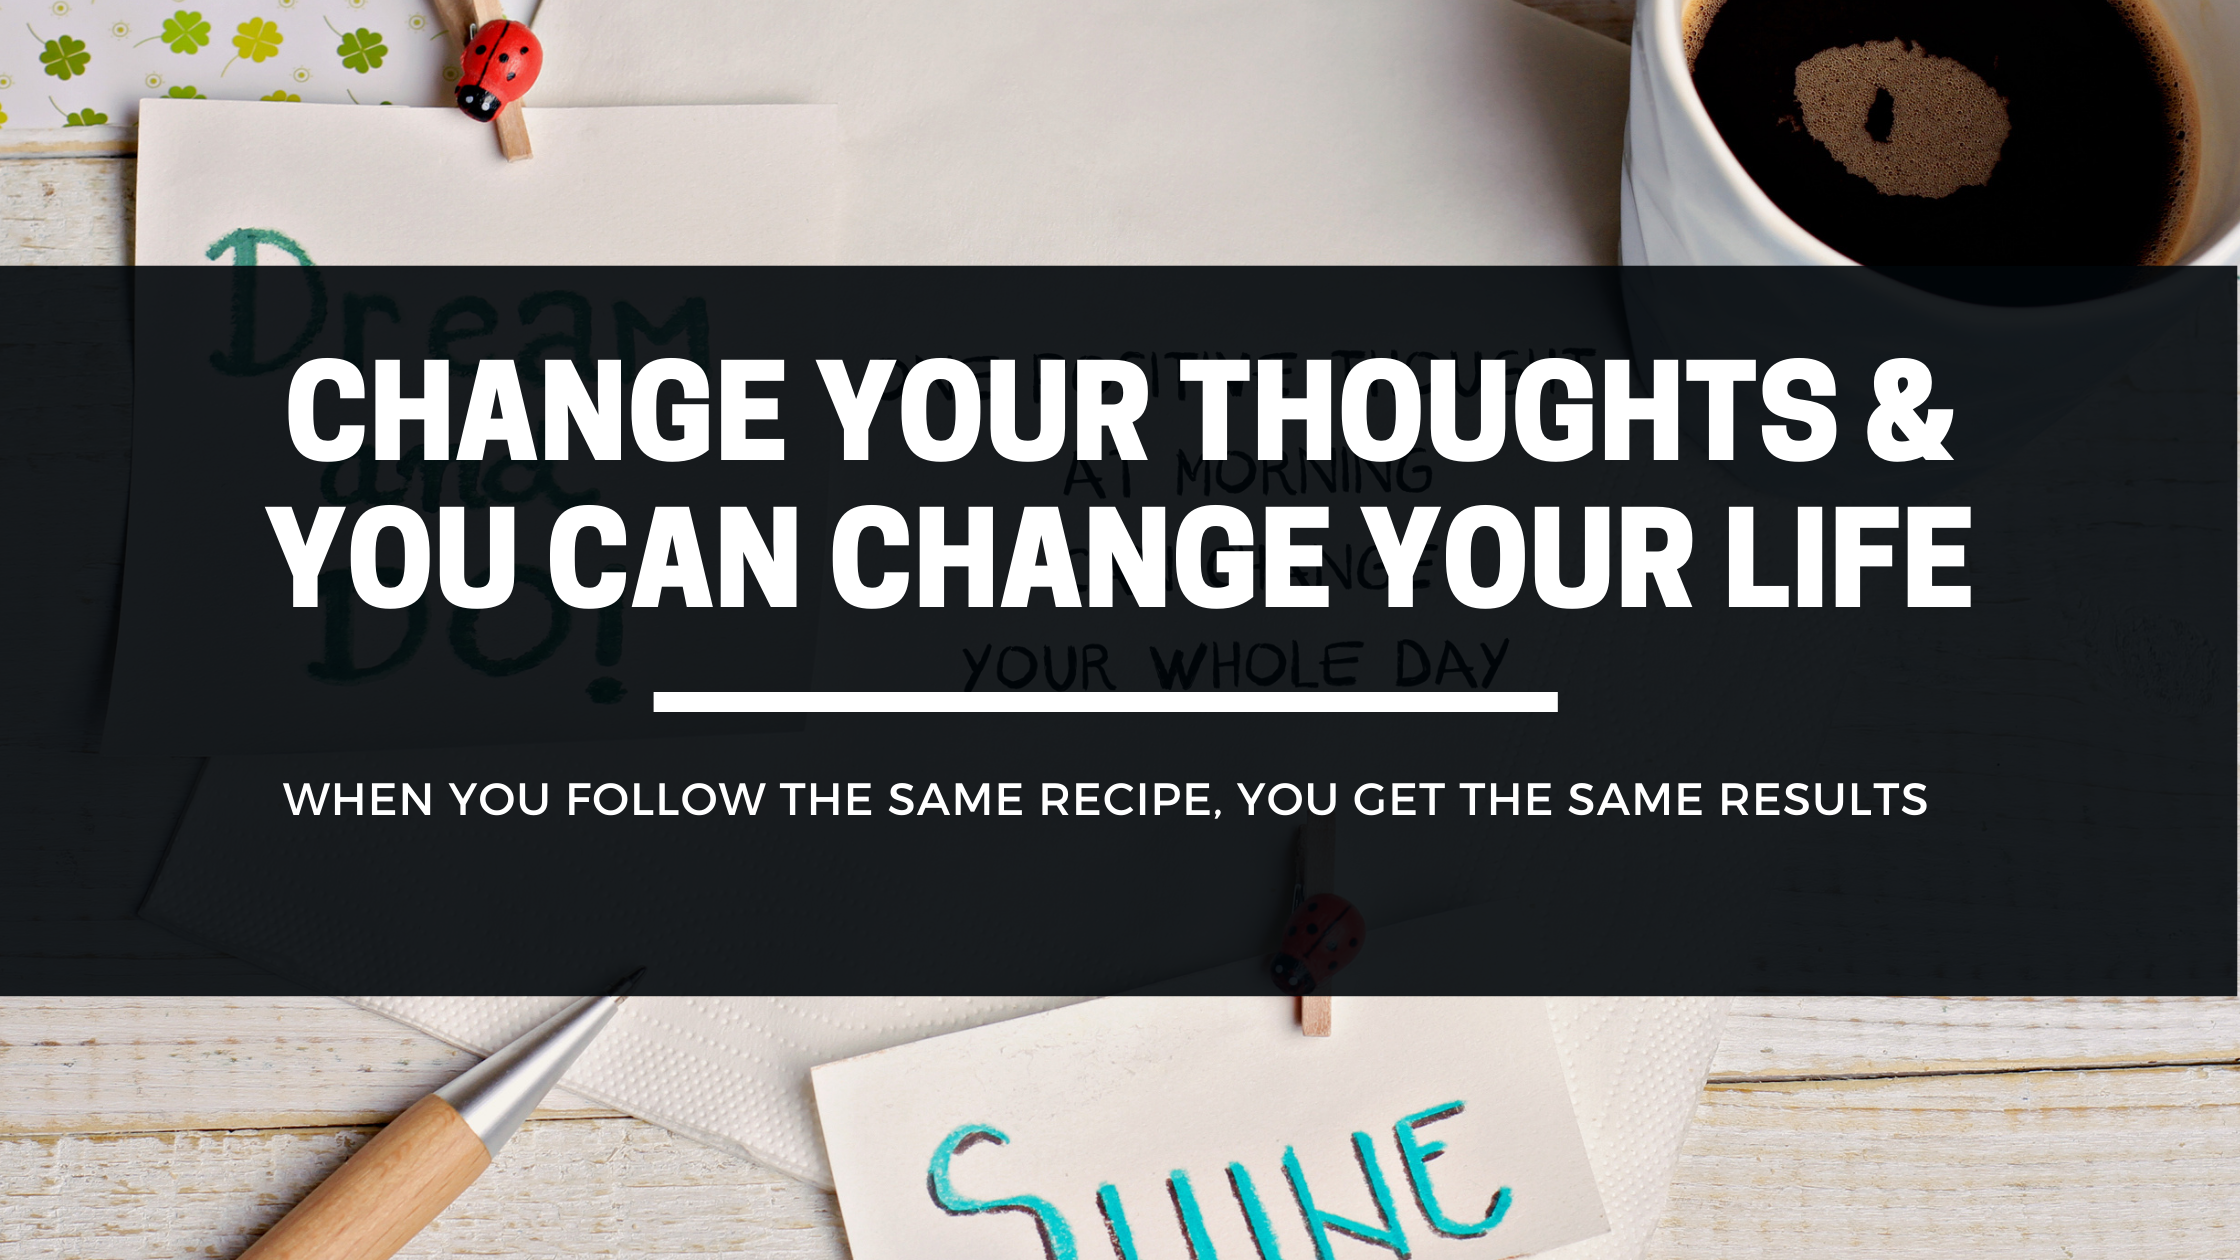 Change Your Thoughts & You Can Change Your Life